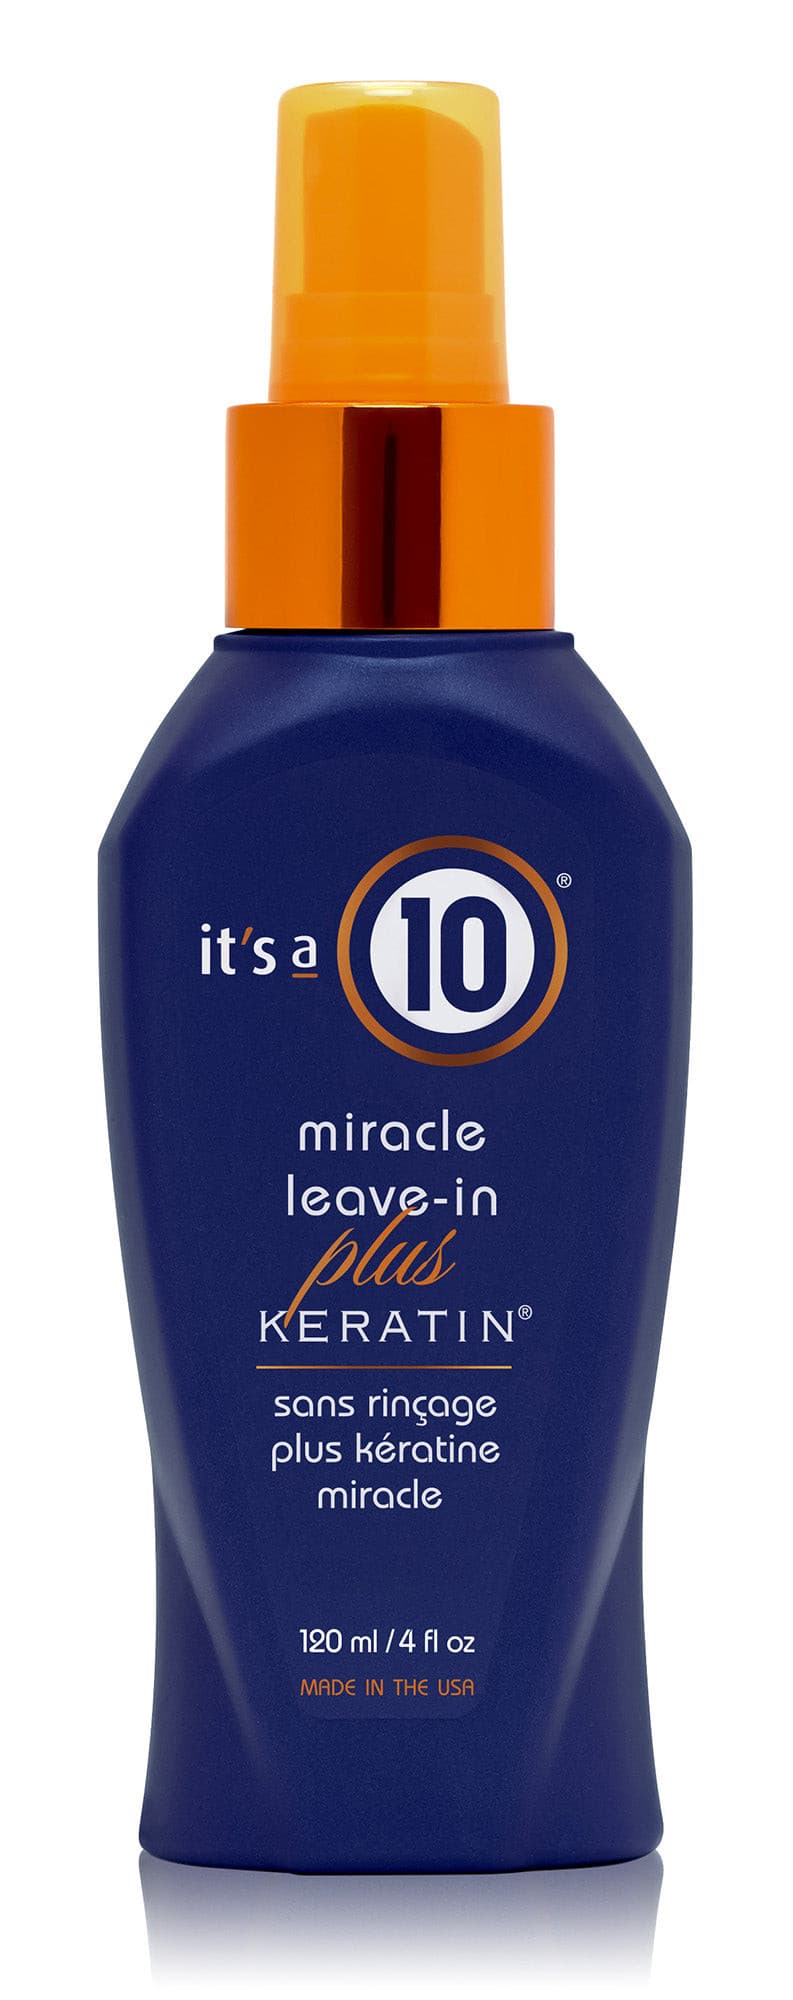 Miracle Leave-in Plus Keratin